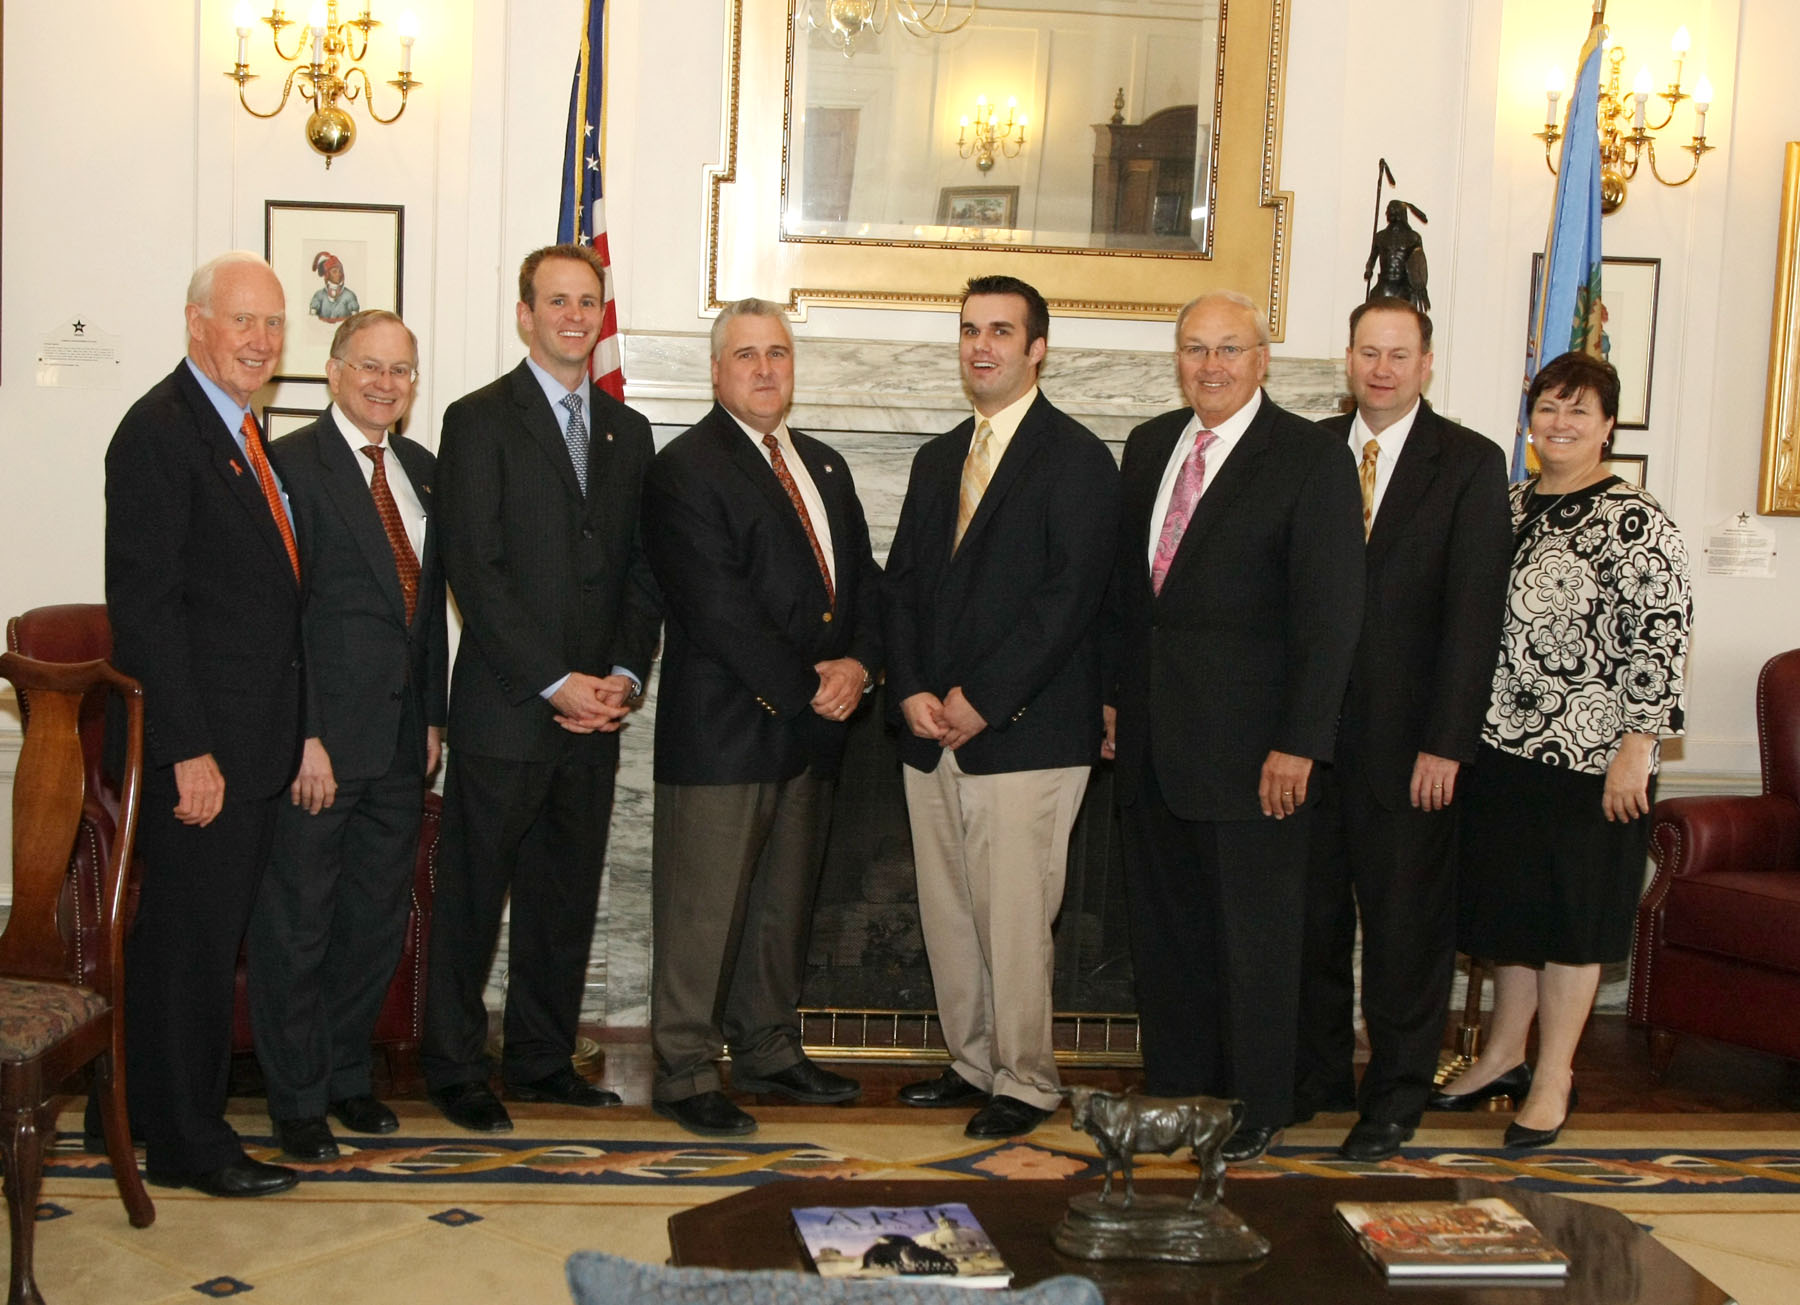 Udall and Truman Scholar Blake Jackson (5th from left) is pictured with State Senator Jim Halligan, former Stillwater City Councilor Tom Dugger, State Representative Cory Williams, State Senator Mike Schulz, (Jackson) State Senator Richard Lerblance, State Senator Eddie Fields and State Representative Lee Denney. Jackson an Oklahoma State University junior from Hartshorne, Okla. was surprised with the announcement he had received the two national scholarships while working as an intern at the State Capitol. The agribusiness major is the first OSU student to receive both scholarships in the same year. He is the 16th OSU student selected for the Truman honor. The university was Oklahoma’s inaugural Truman Honor Institution.